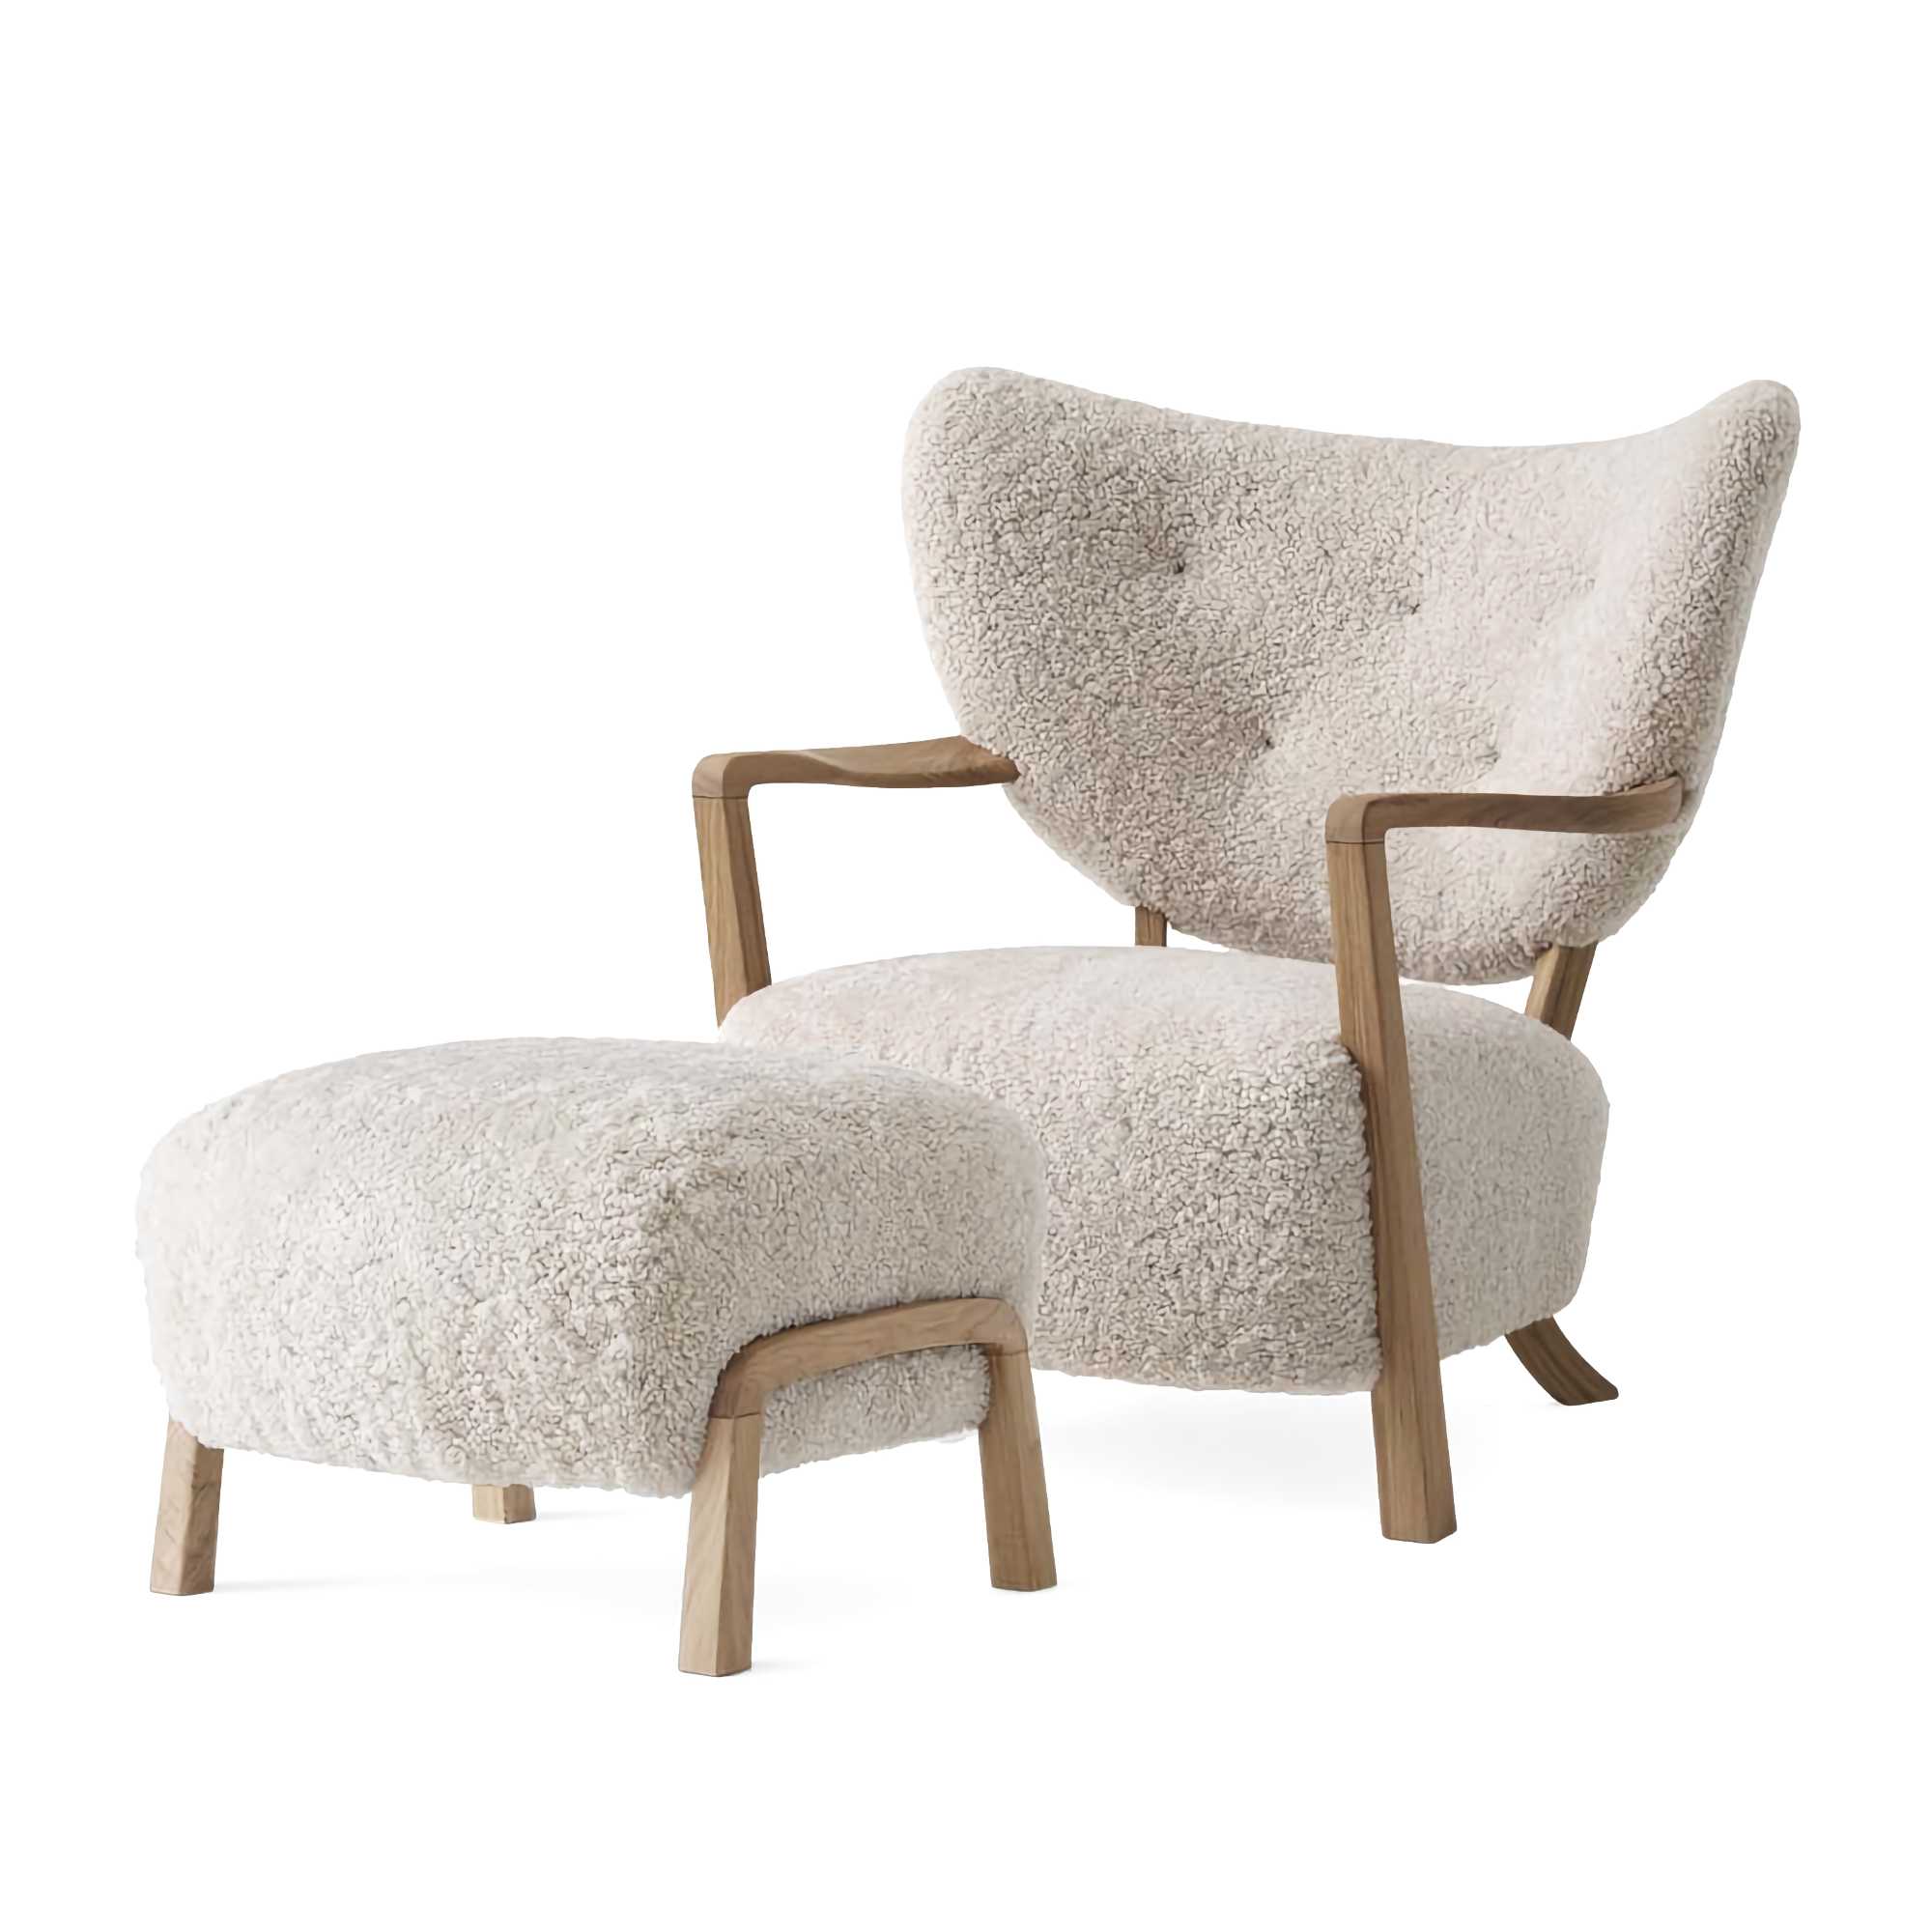 &Tradition ATD2 Wulff Lounge Chair and ATD3 Pouf, sheepskin moonlight/oiled oak